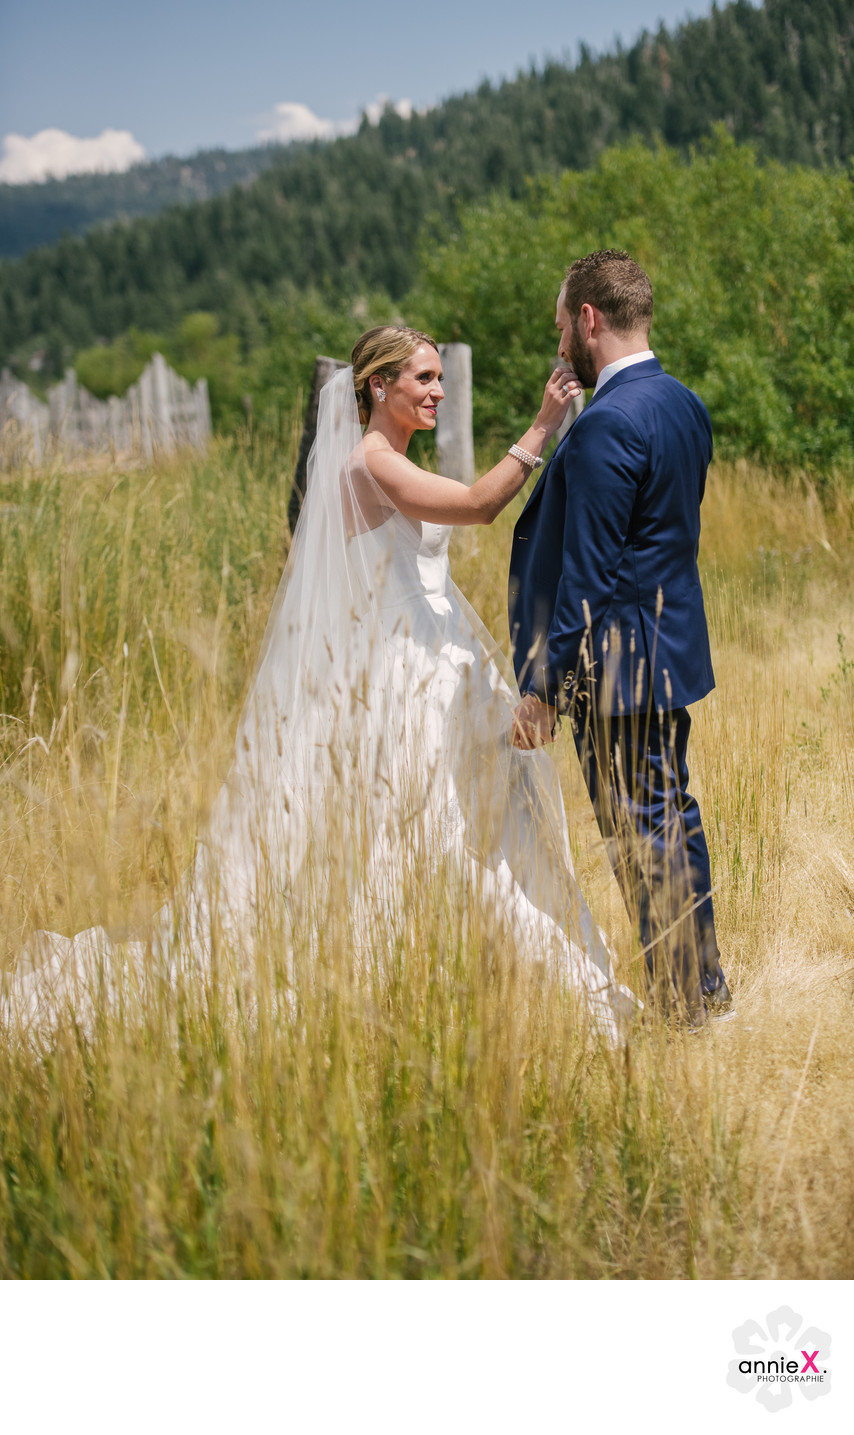 Professional wedding photographer in Squaw Valley
